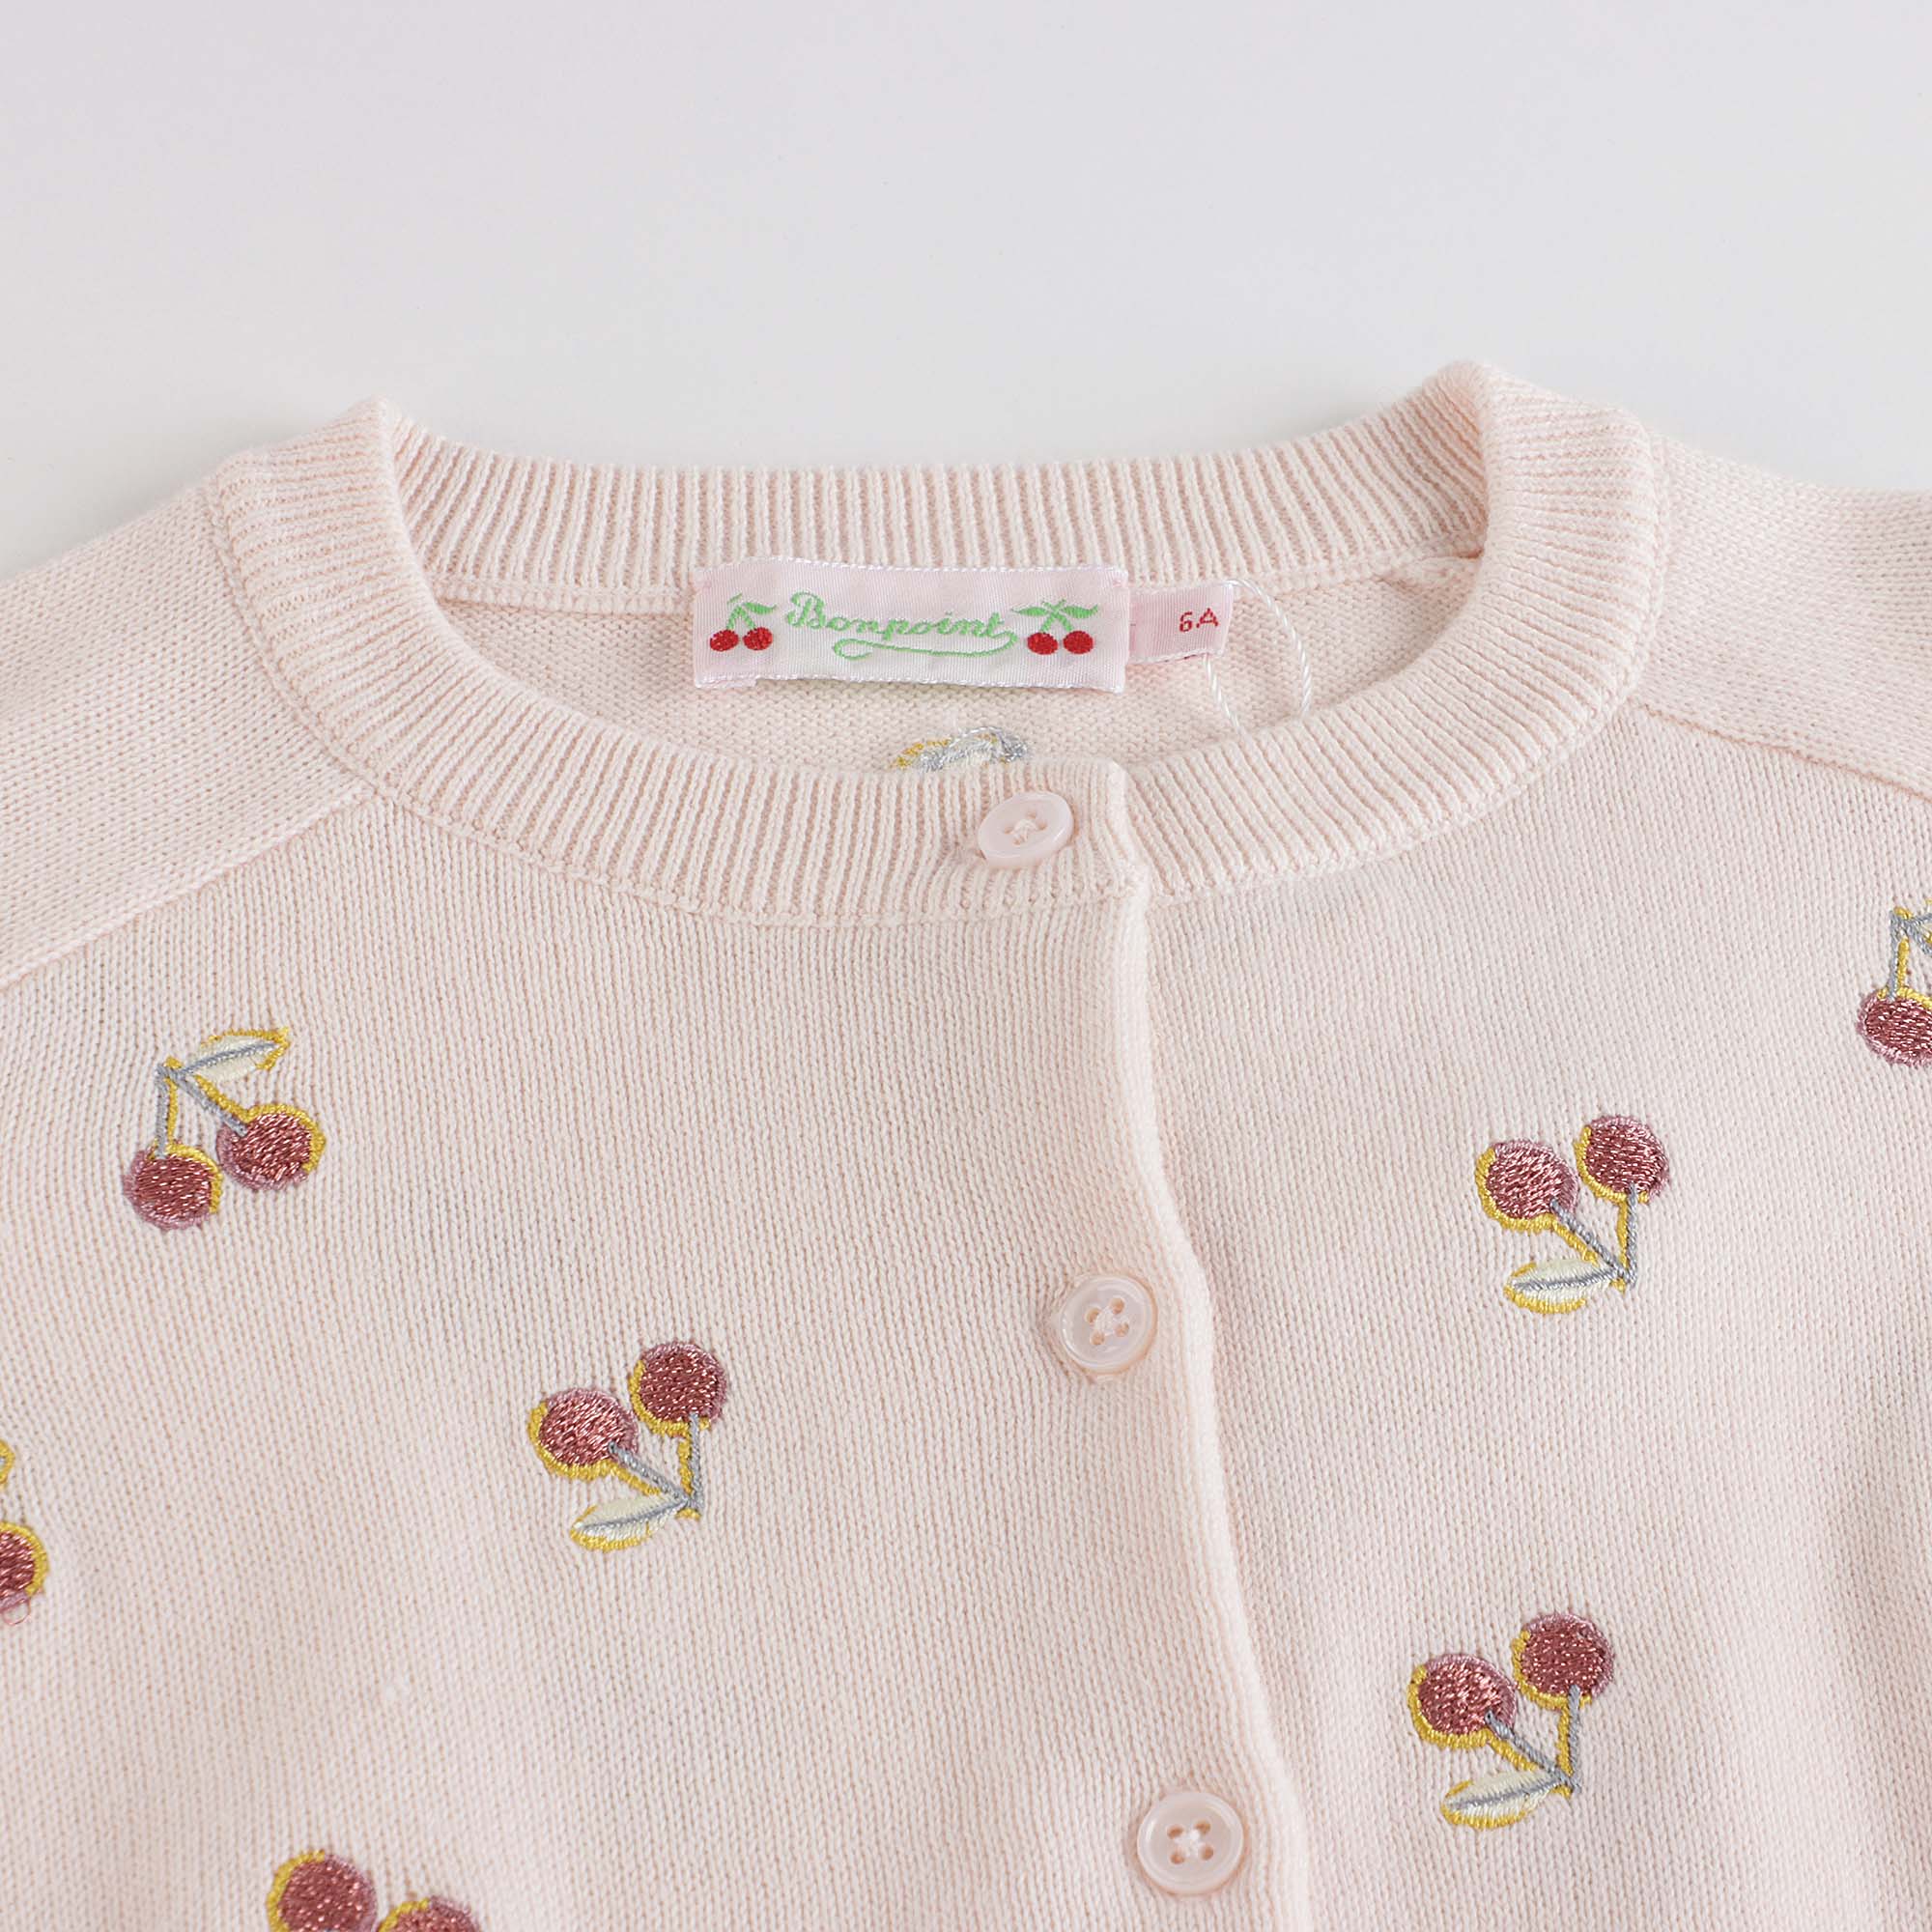 Girls Pink Embroidered Cotton Cardigan